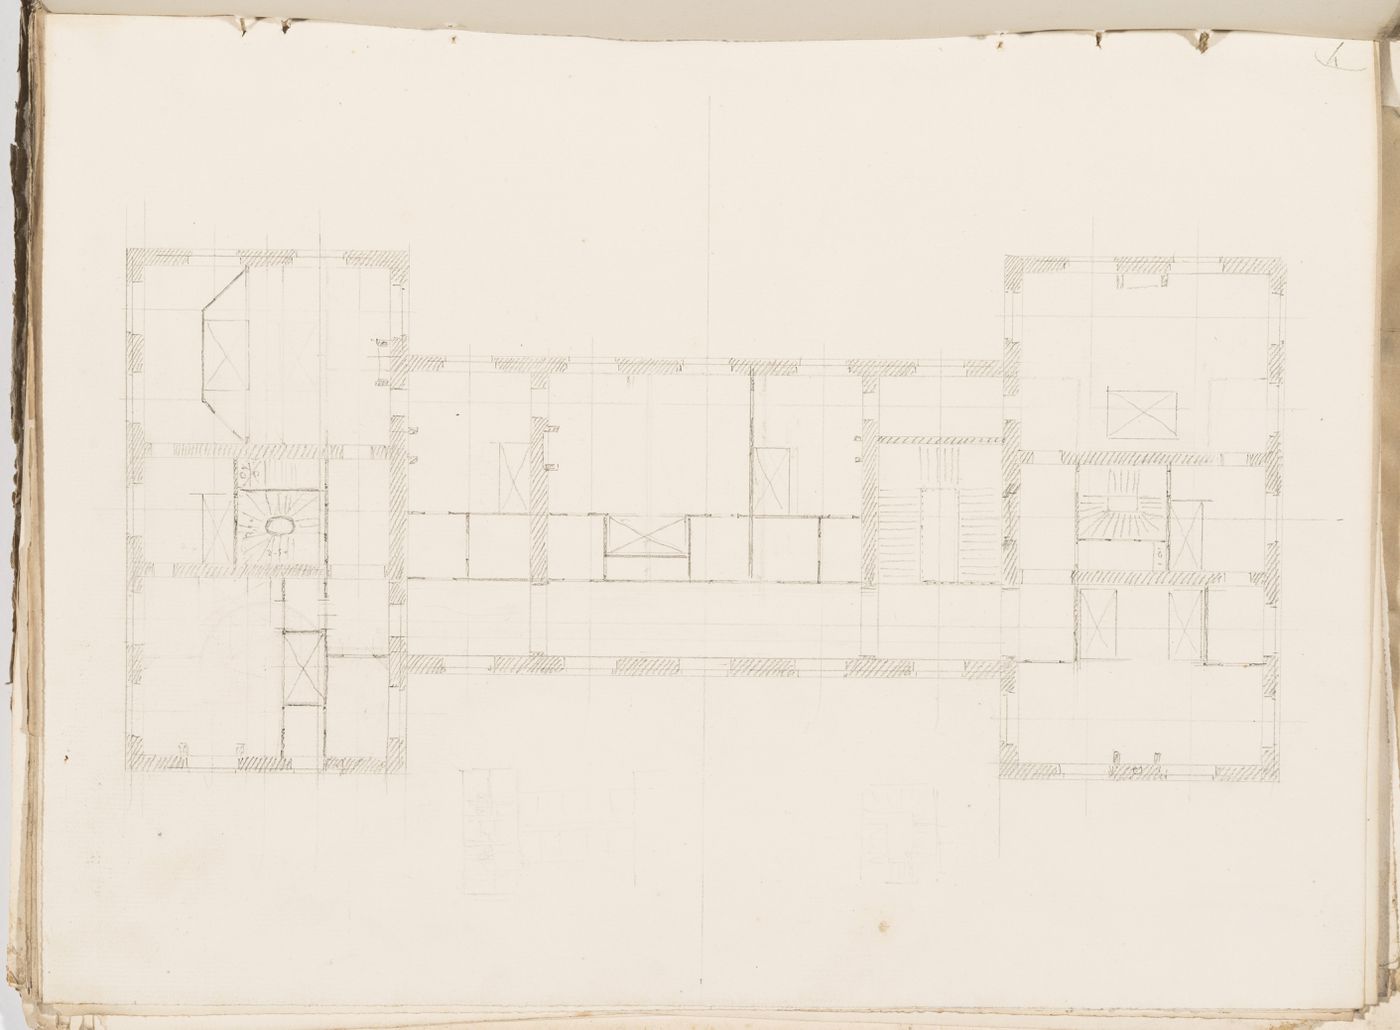 Project no. 4 for a country house for comte Treilhard: First floor plan